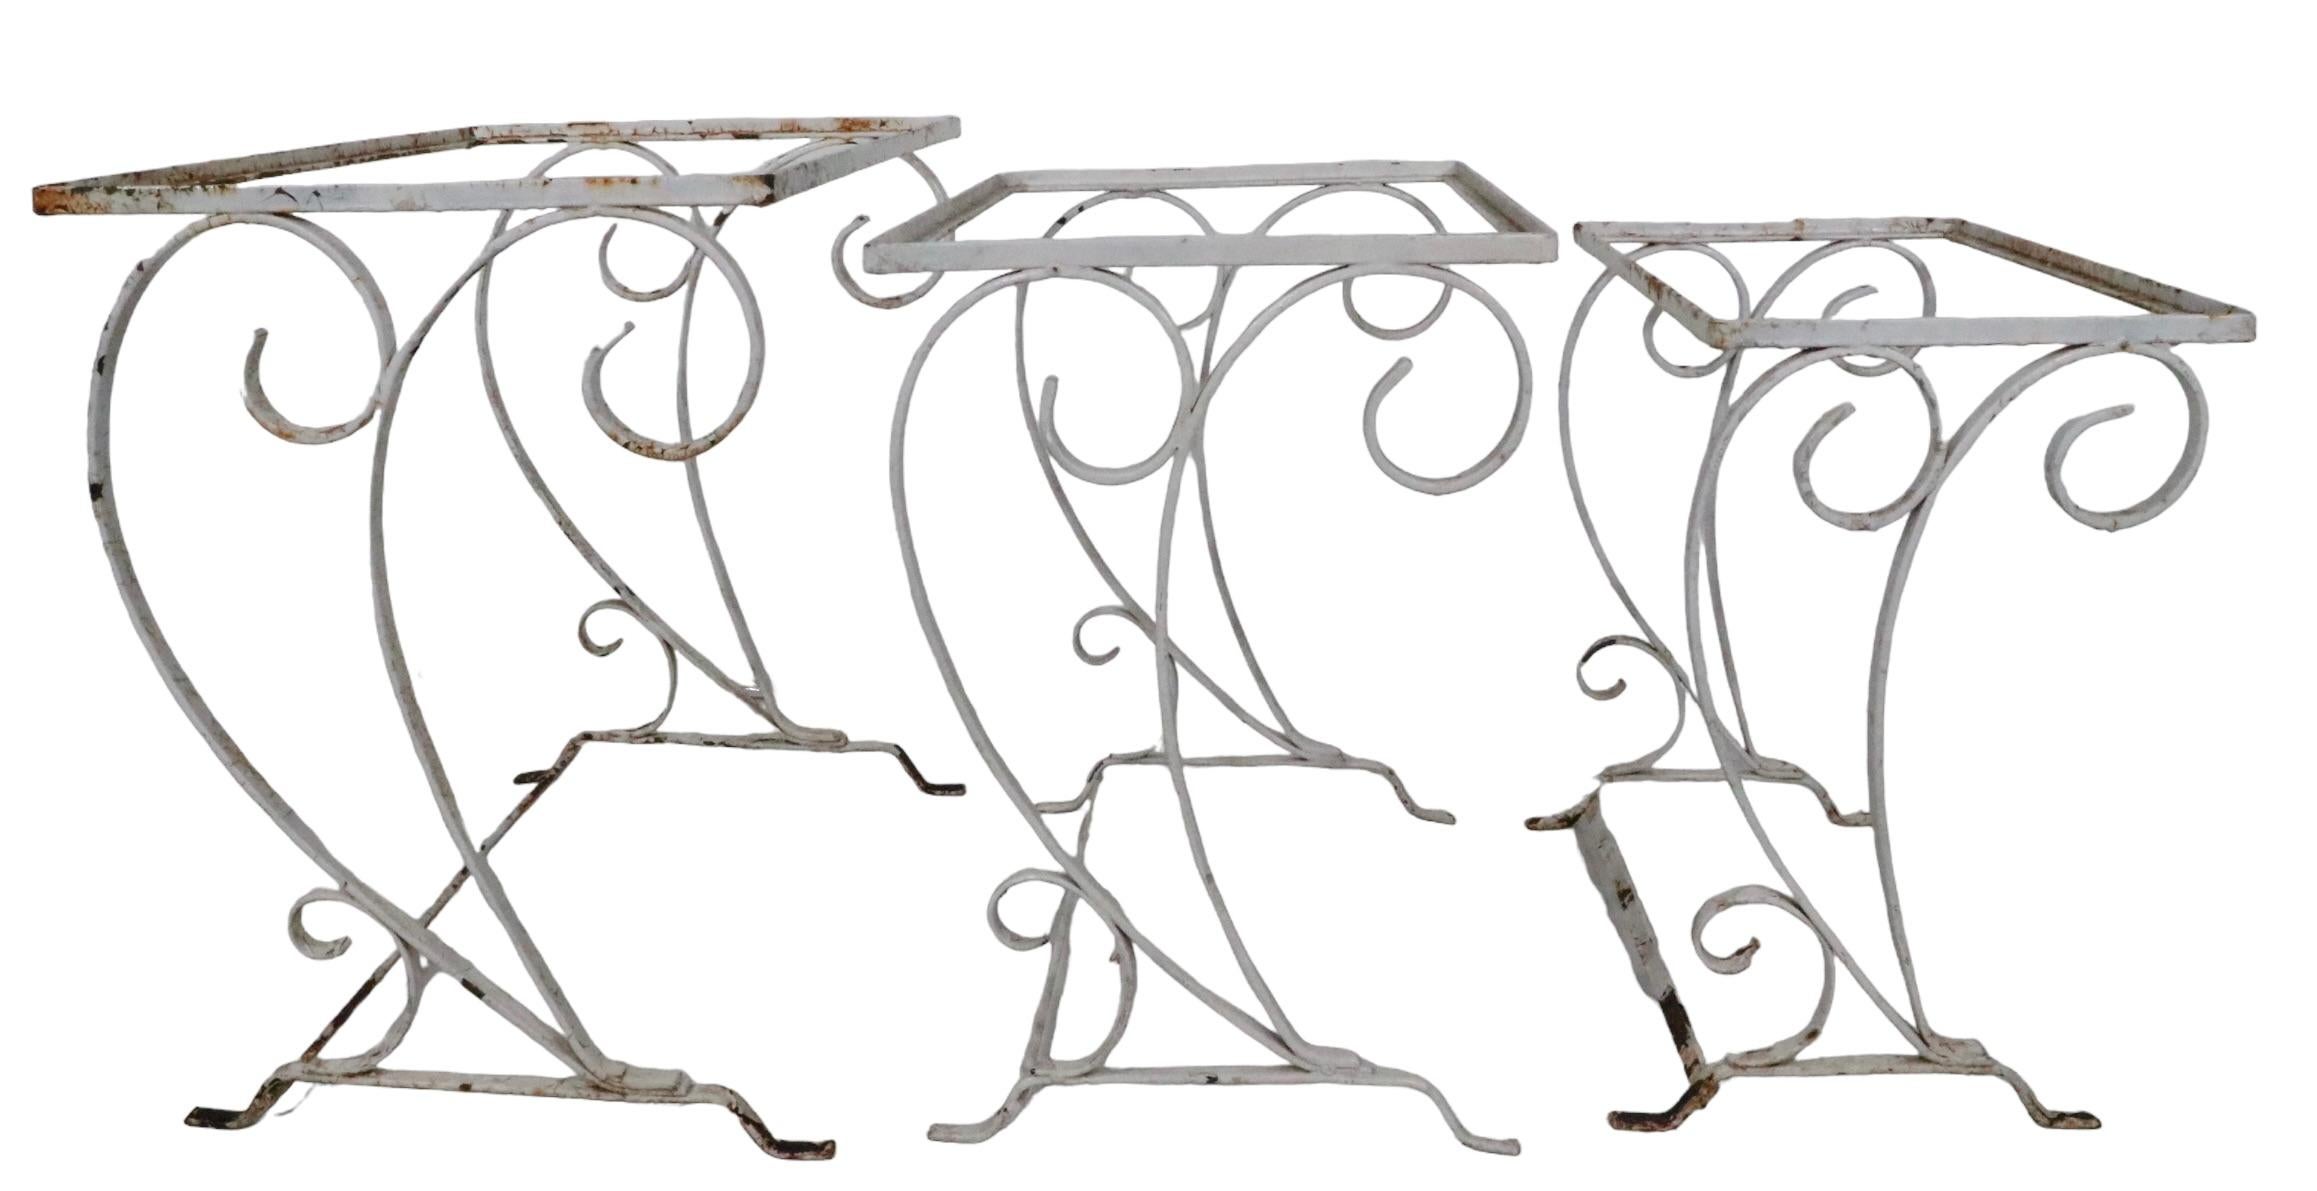 Nest of 3 Art Deco Mid Century Wrought Iron Patio Garden Tables by Salterini For Sale 2